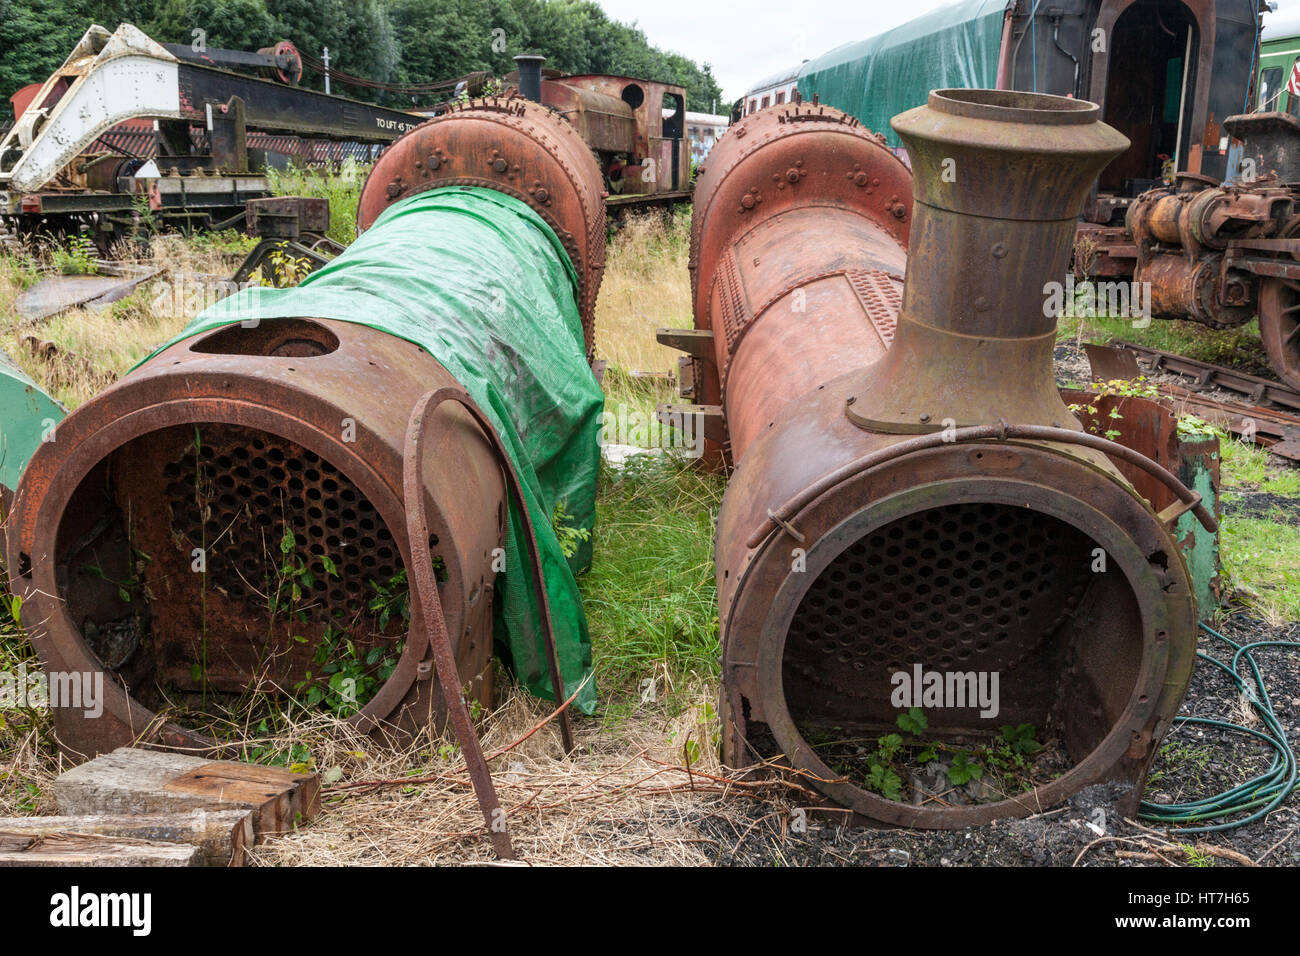 Two old steam engine boilers among other parts and rolling stock awaiting restoration, Nottingham Transport Heritage Centre, Nottinghamshire, UK Stock Photo